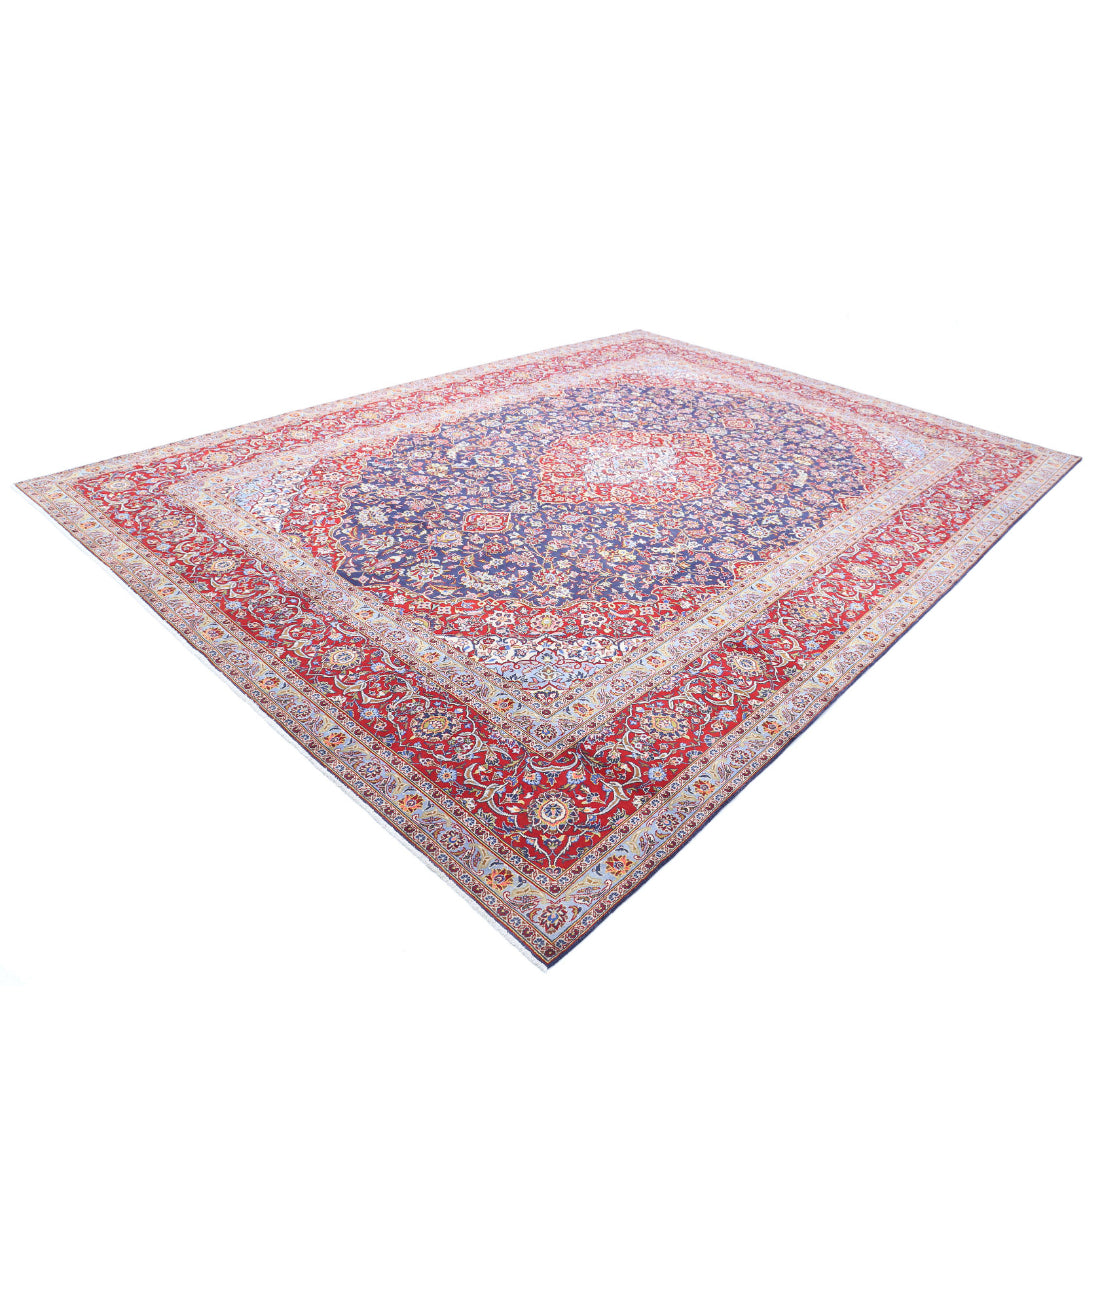 Hand Knotted Persian Kashan Wool Rug - 9'6'' x 13'3'' 9'6'' x 13'3'' (285 X 398) / Blue / Red